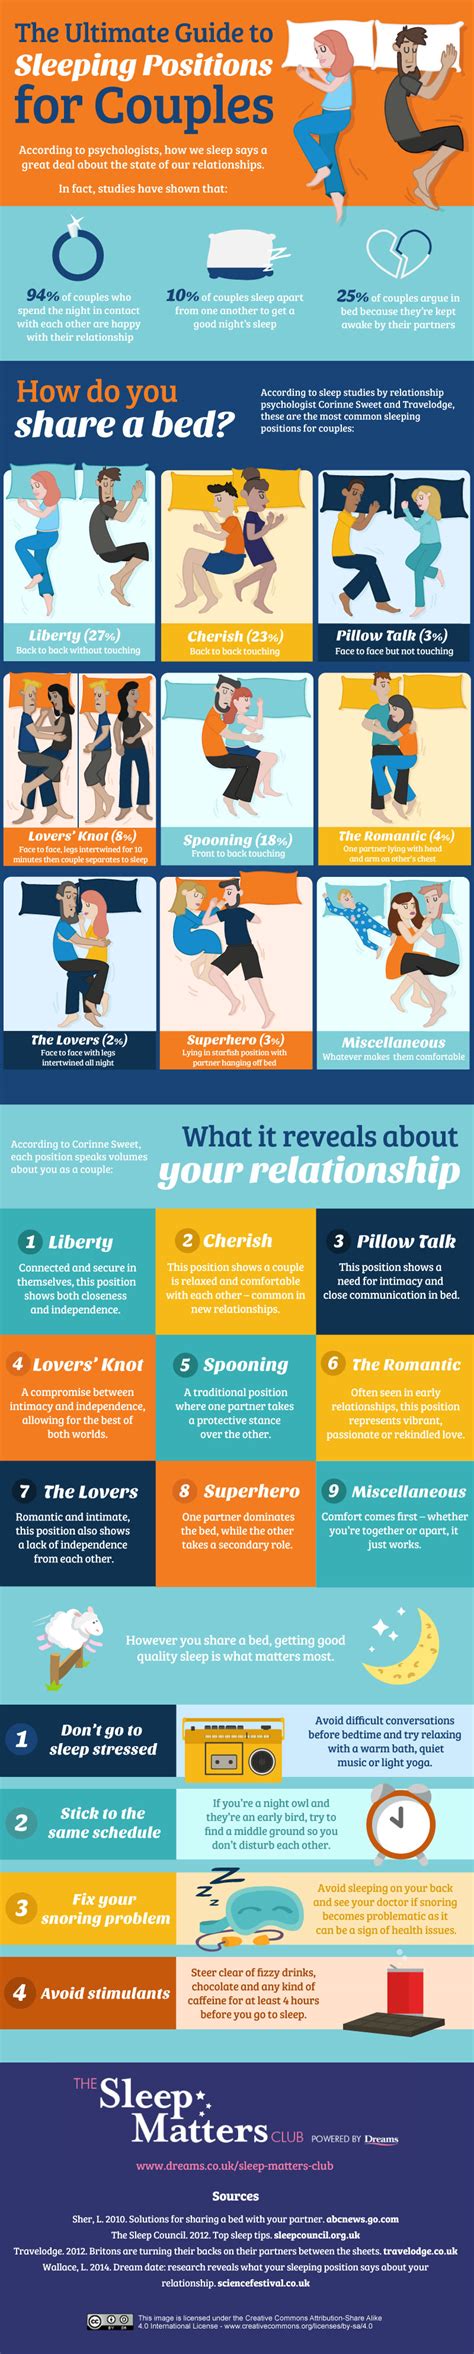 The Ultimate Guide To Sleeping Positions For Couples Infographic